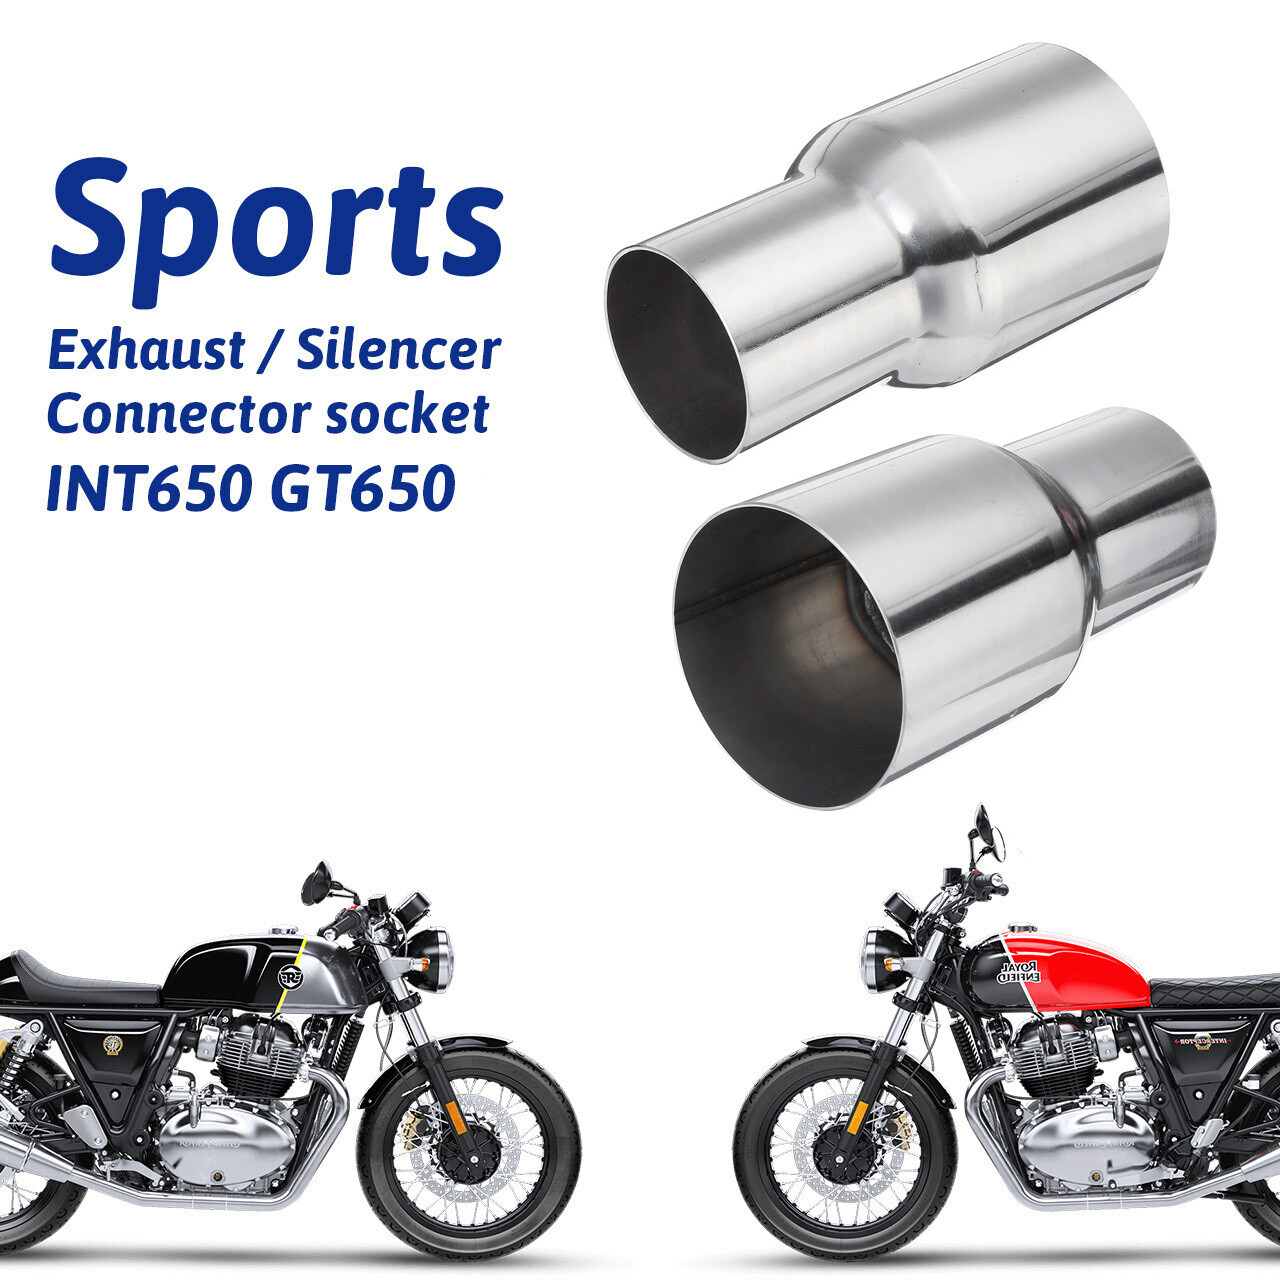 Sports Exhaust/Silencer Connector socket interceptor 650 and GT650 Set of 2